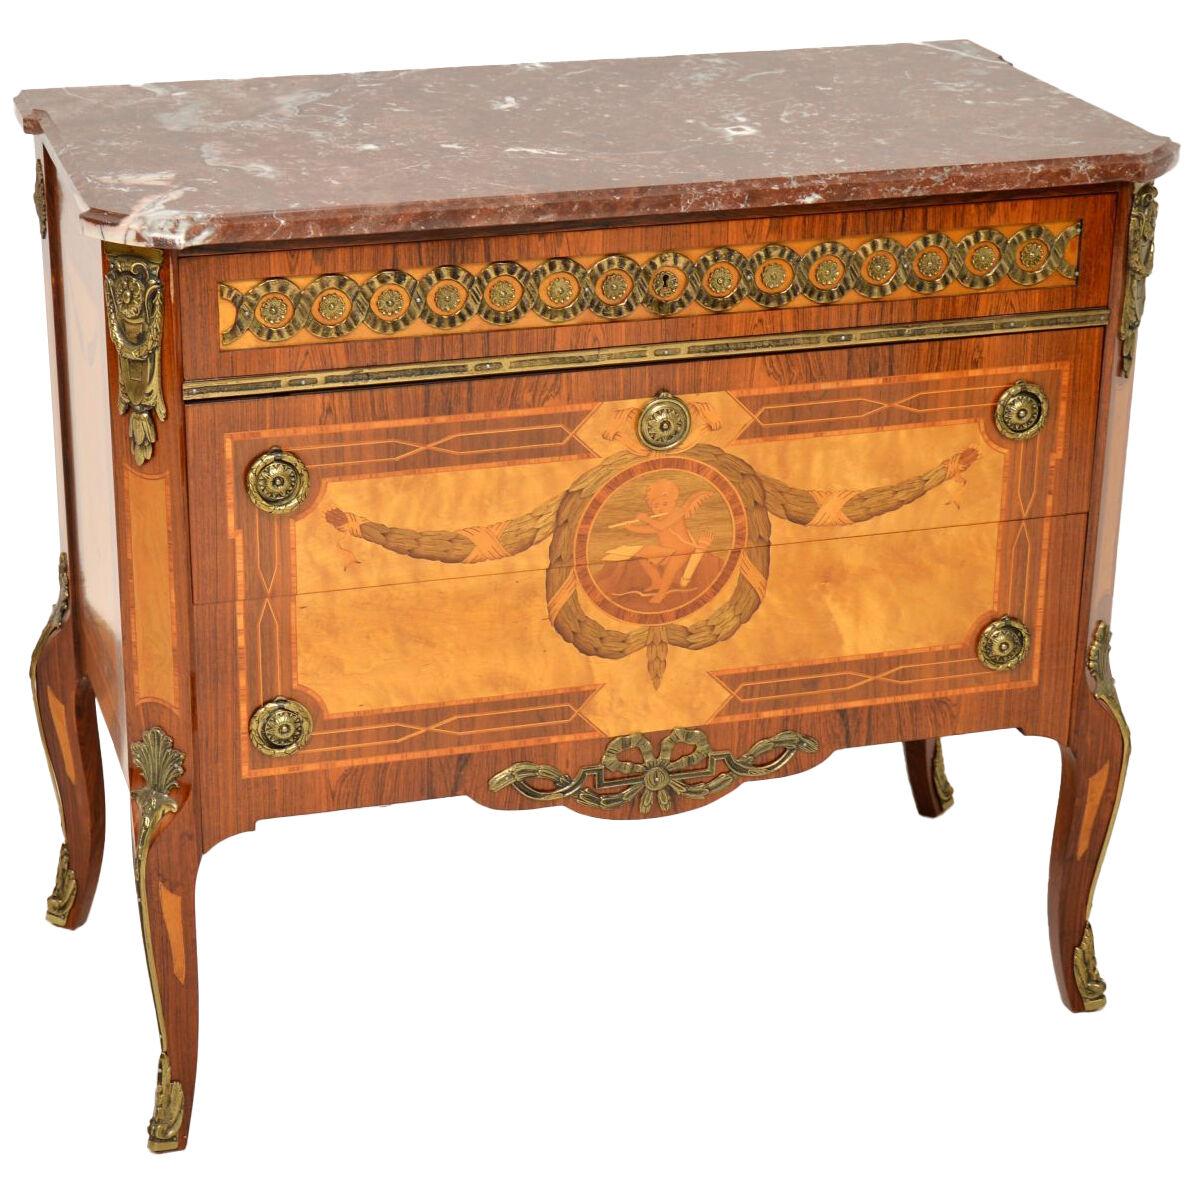 Antique Swedish Inlaid Marquetry Marble Top Commode